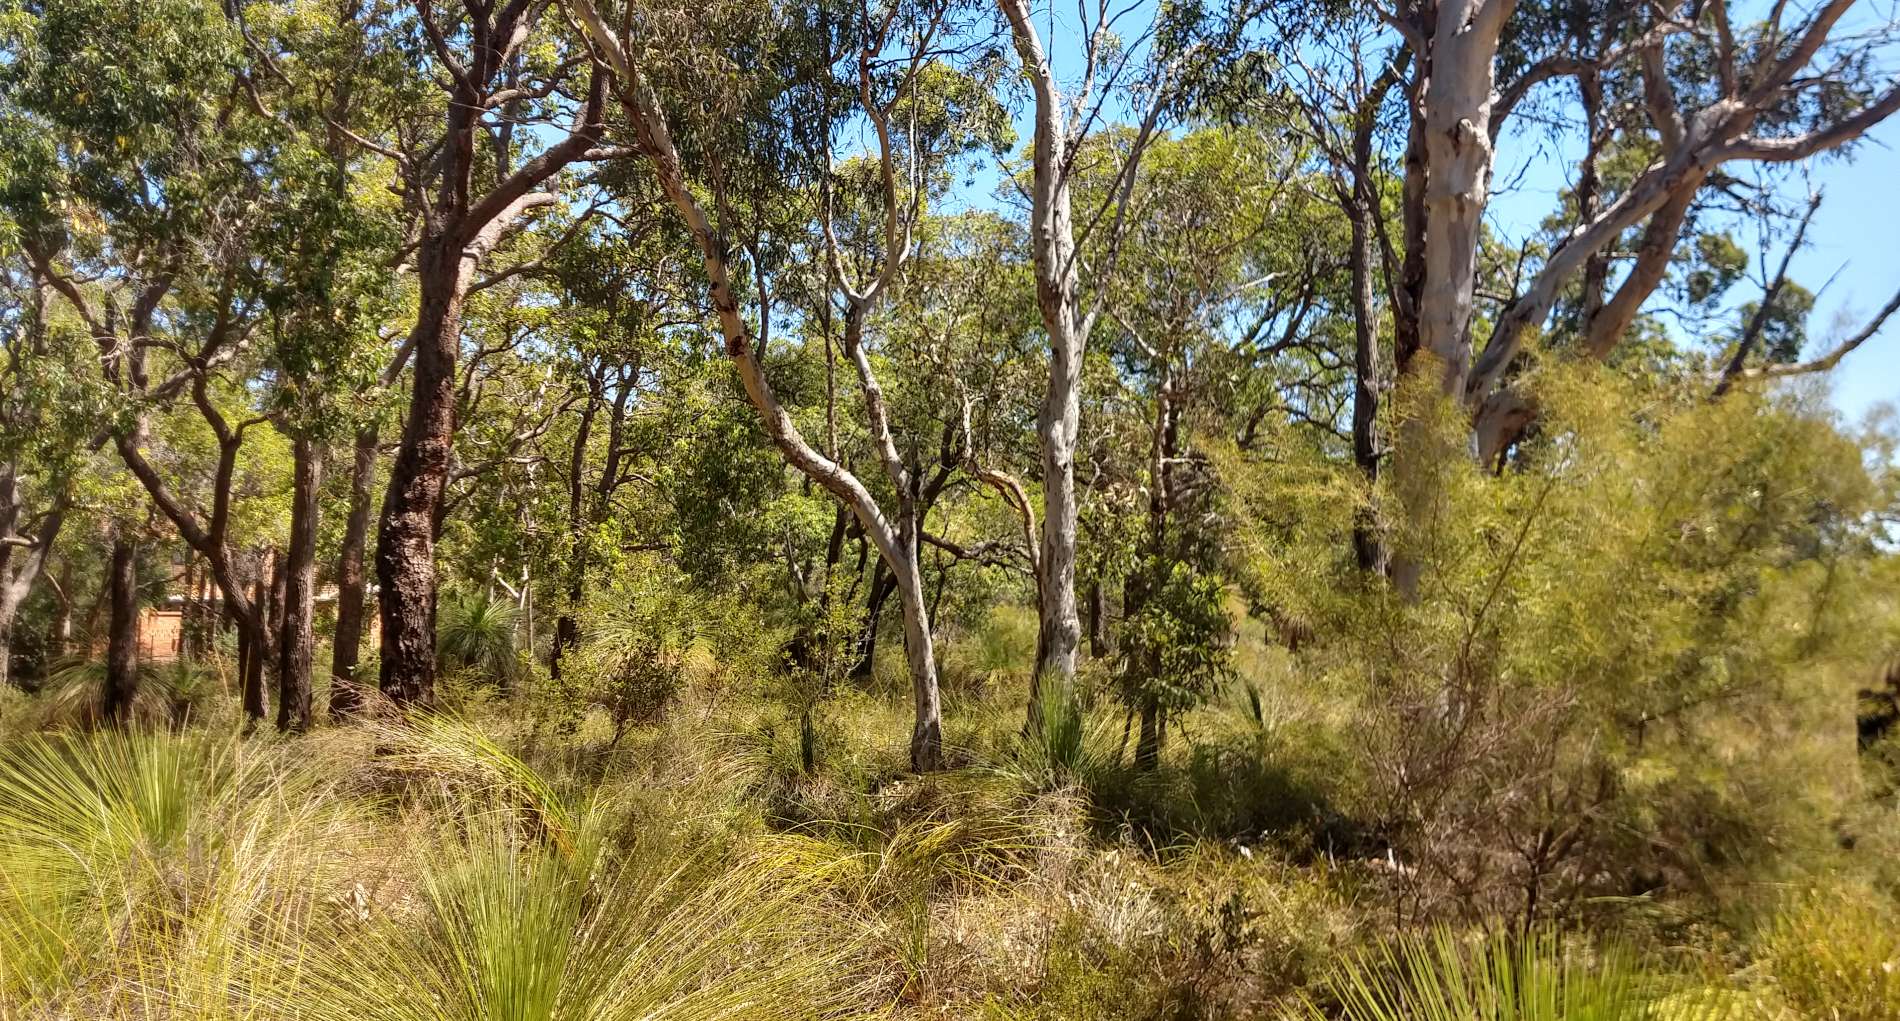 An example of the Southern River vegetation complex showing tall trees over dense shrub land along a creekline